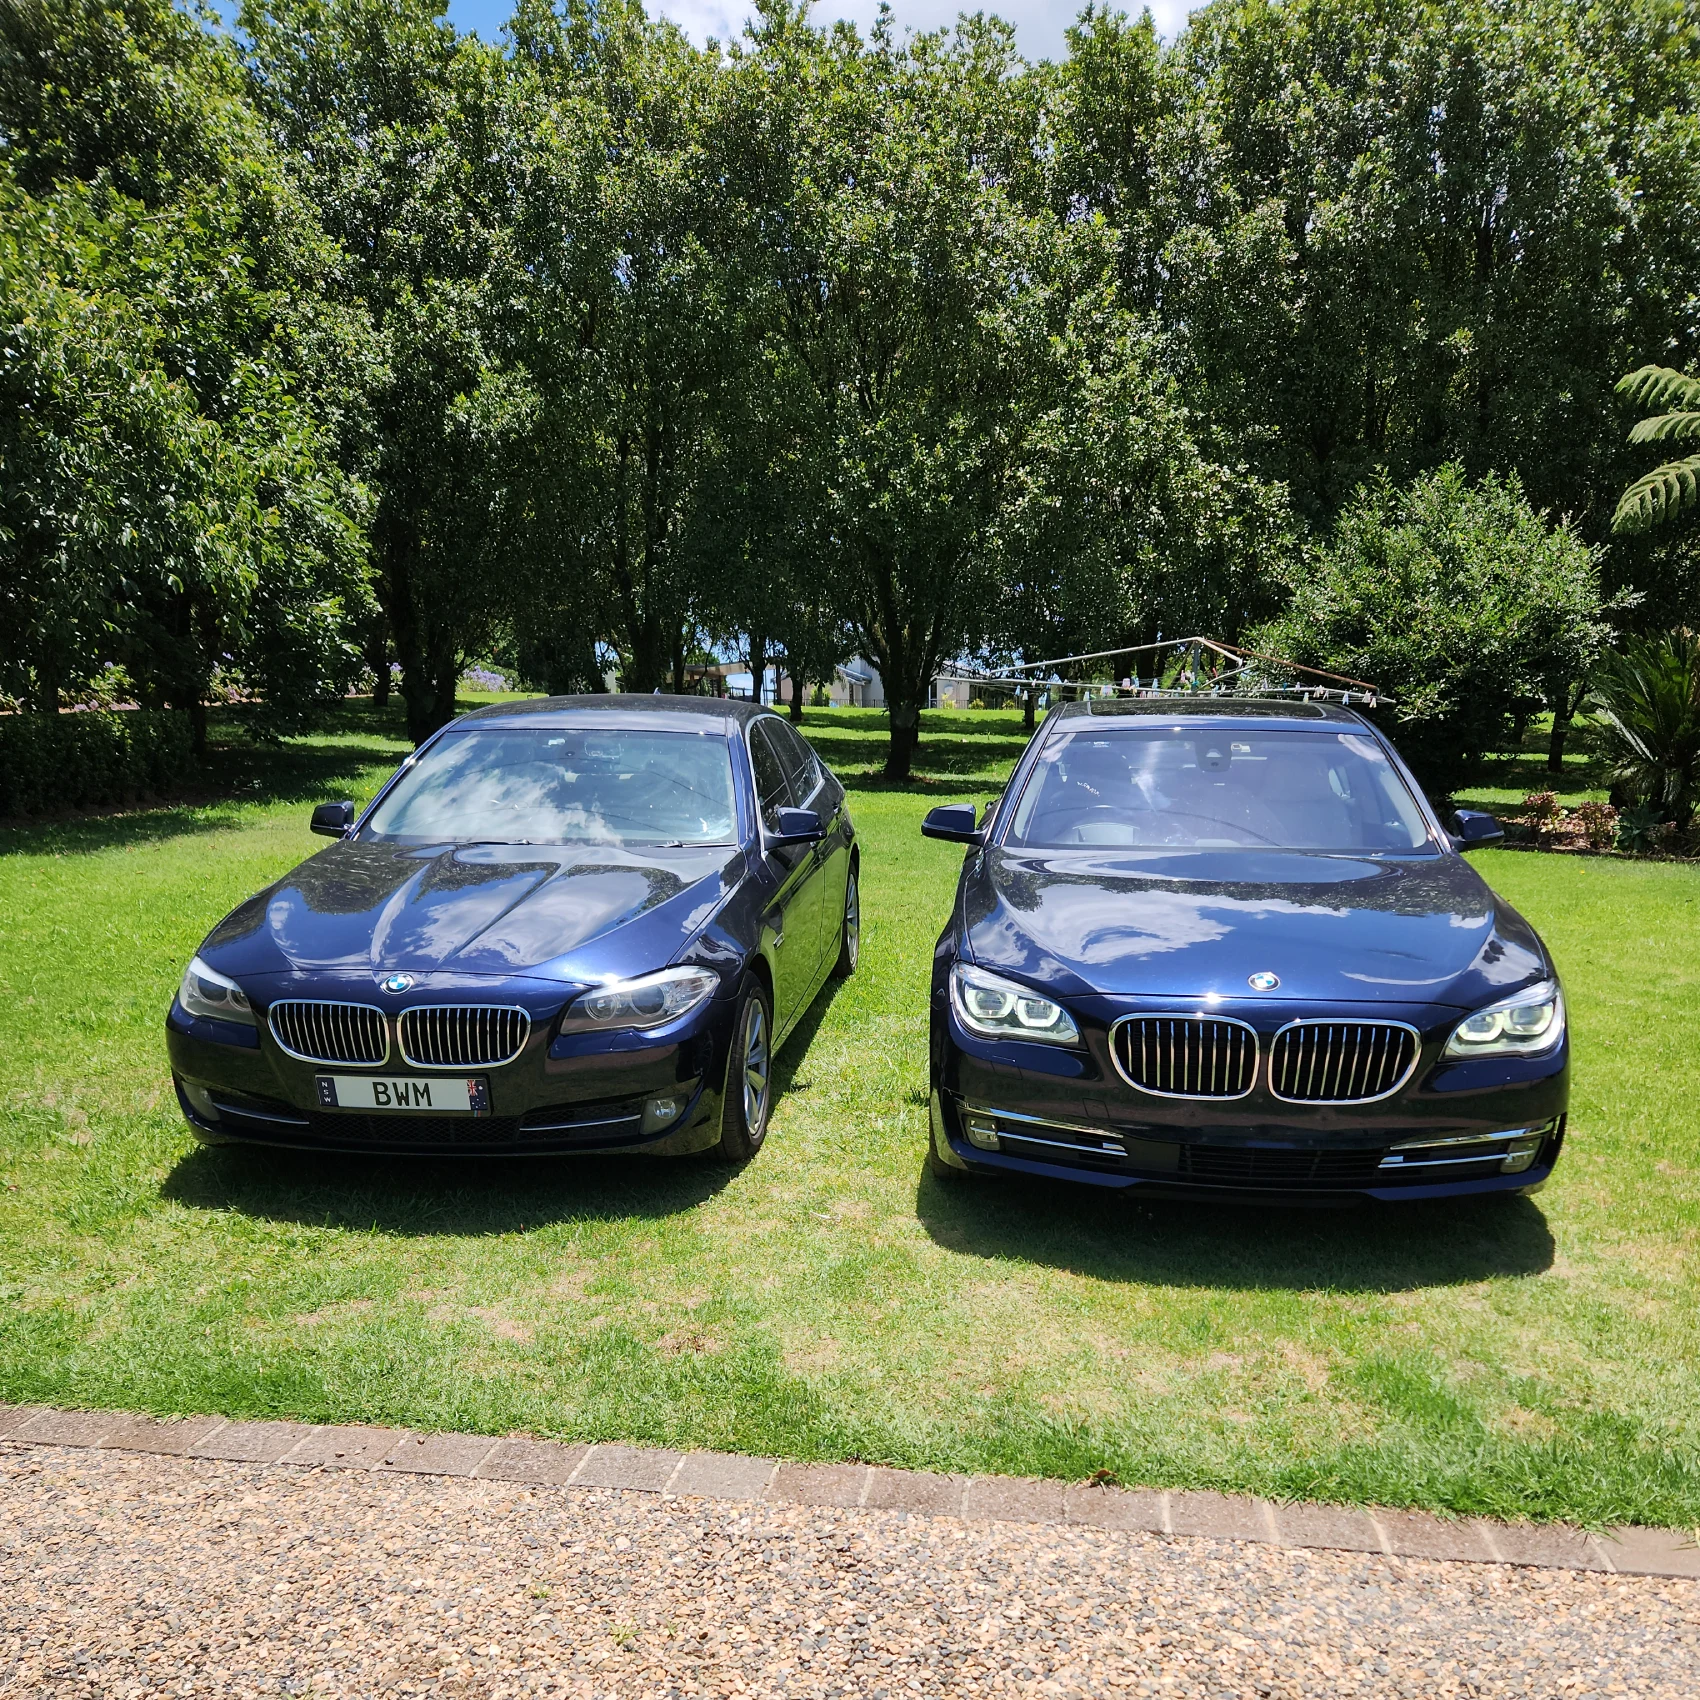 Byron Bay luxury bmw taxi transport for weeding's and events